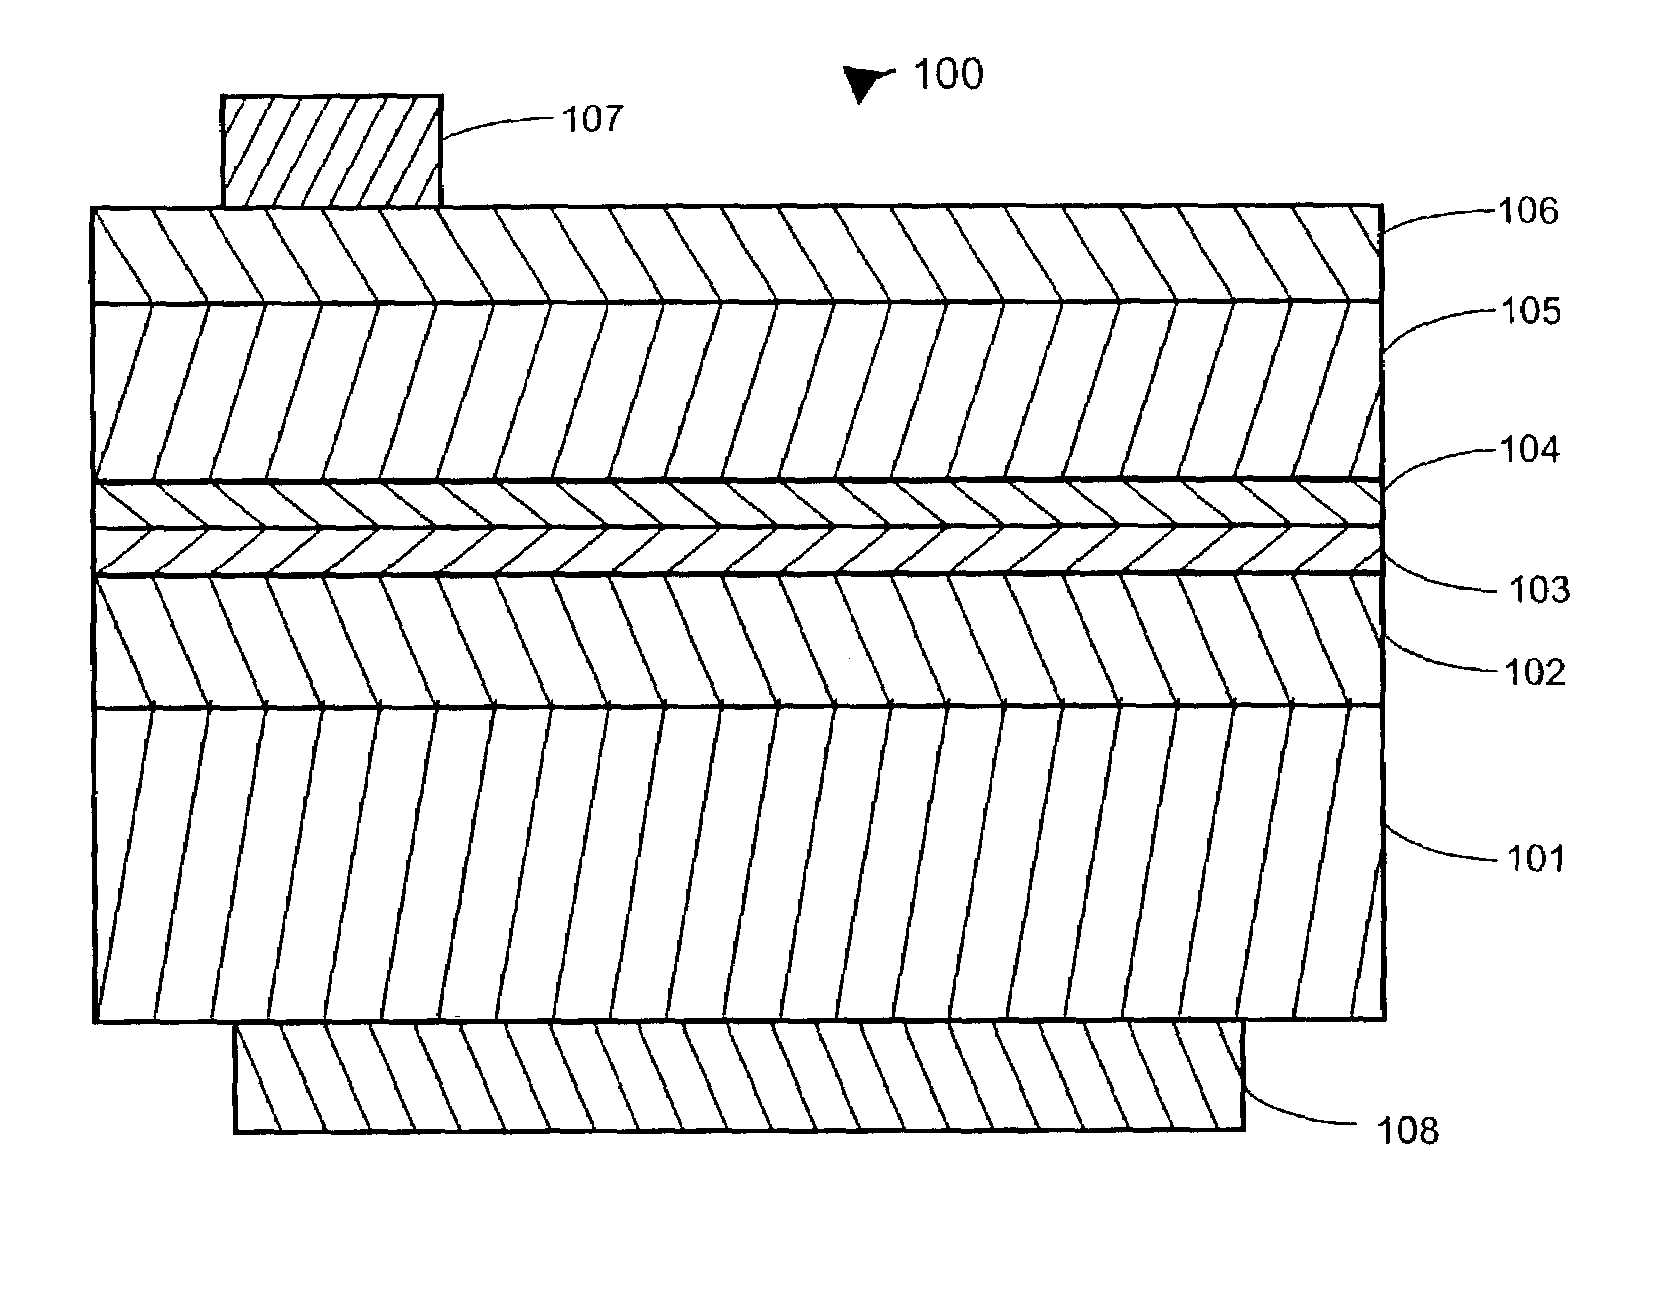 GaP/silicon tandem solar cell with extended temperature range